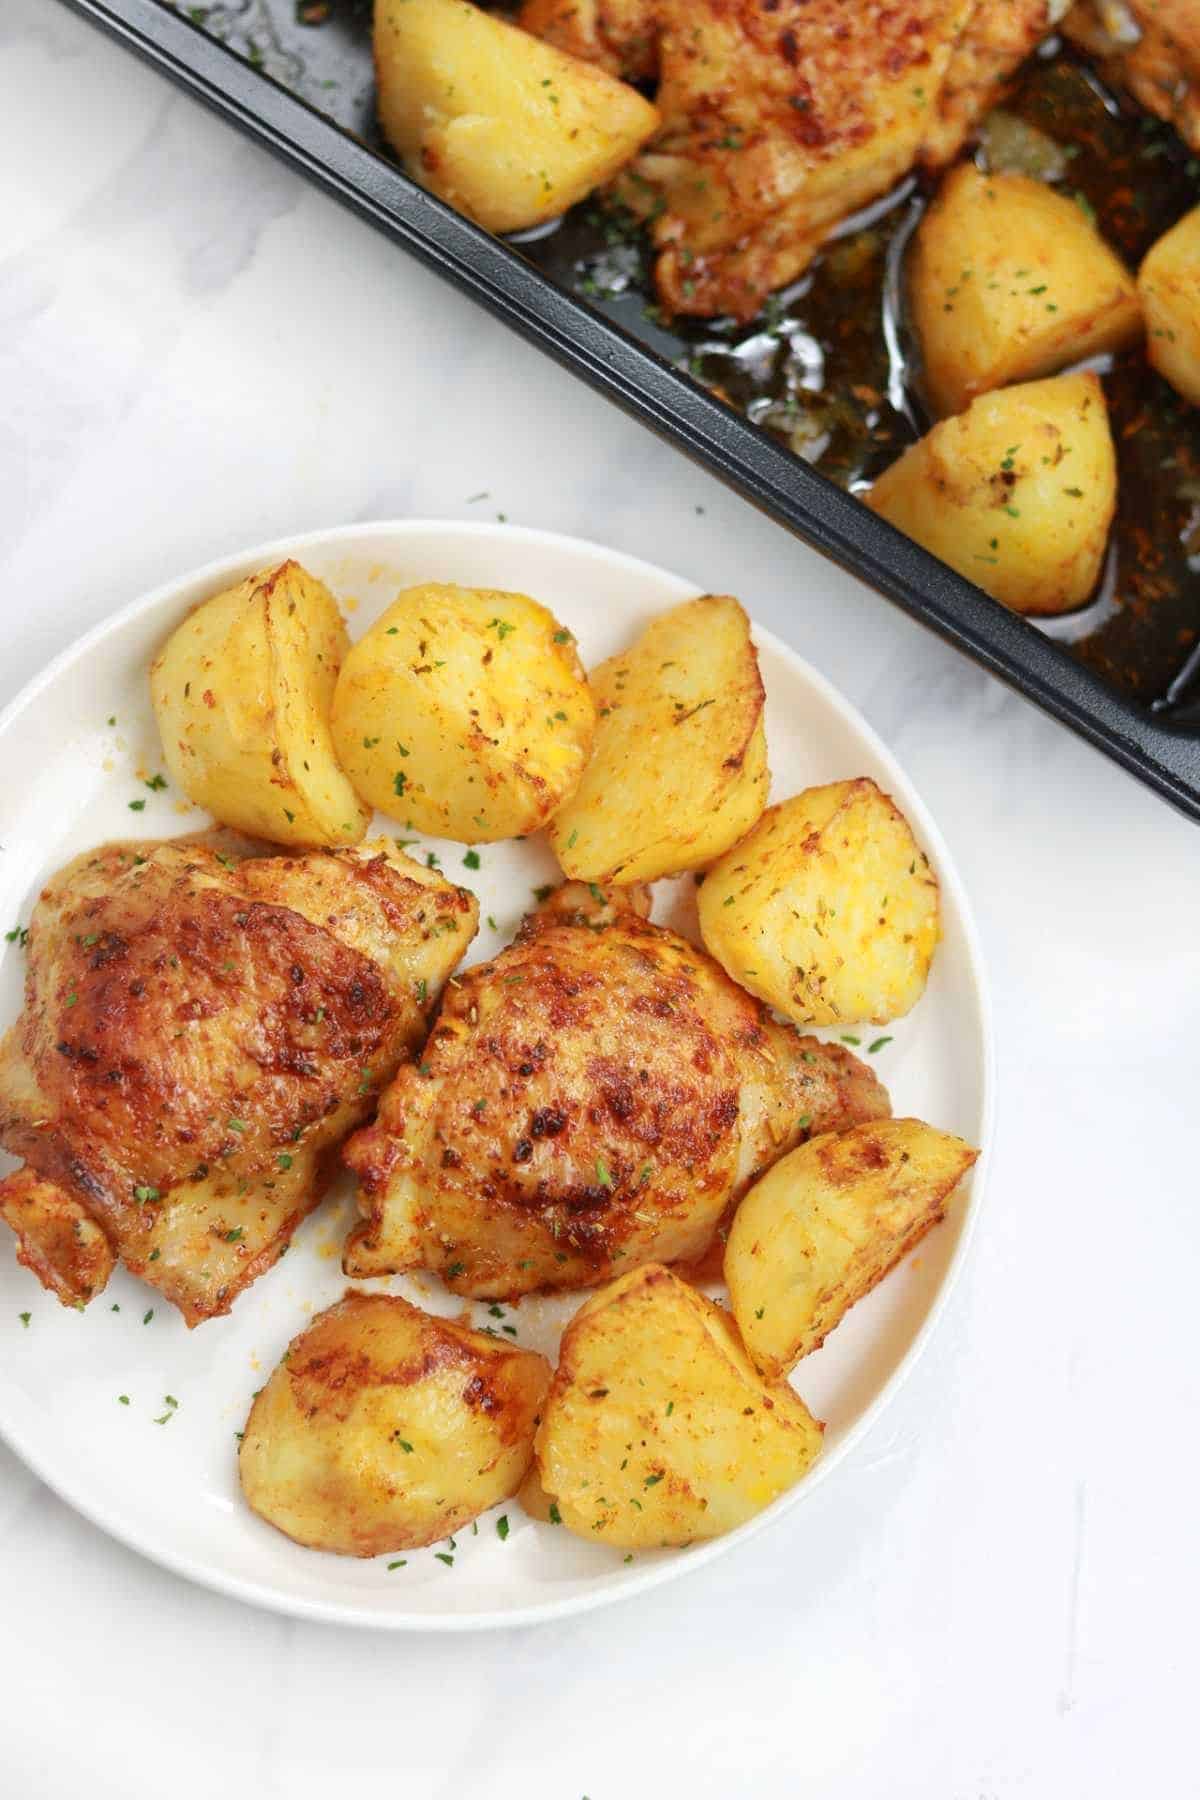 baked chicken and potatoes displayed on a plate and  baking pan.